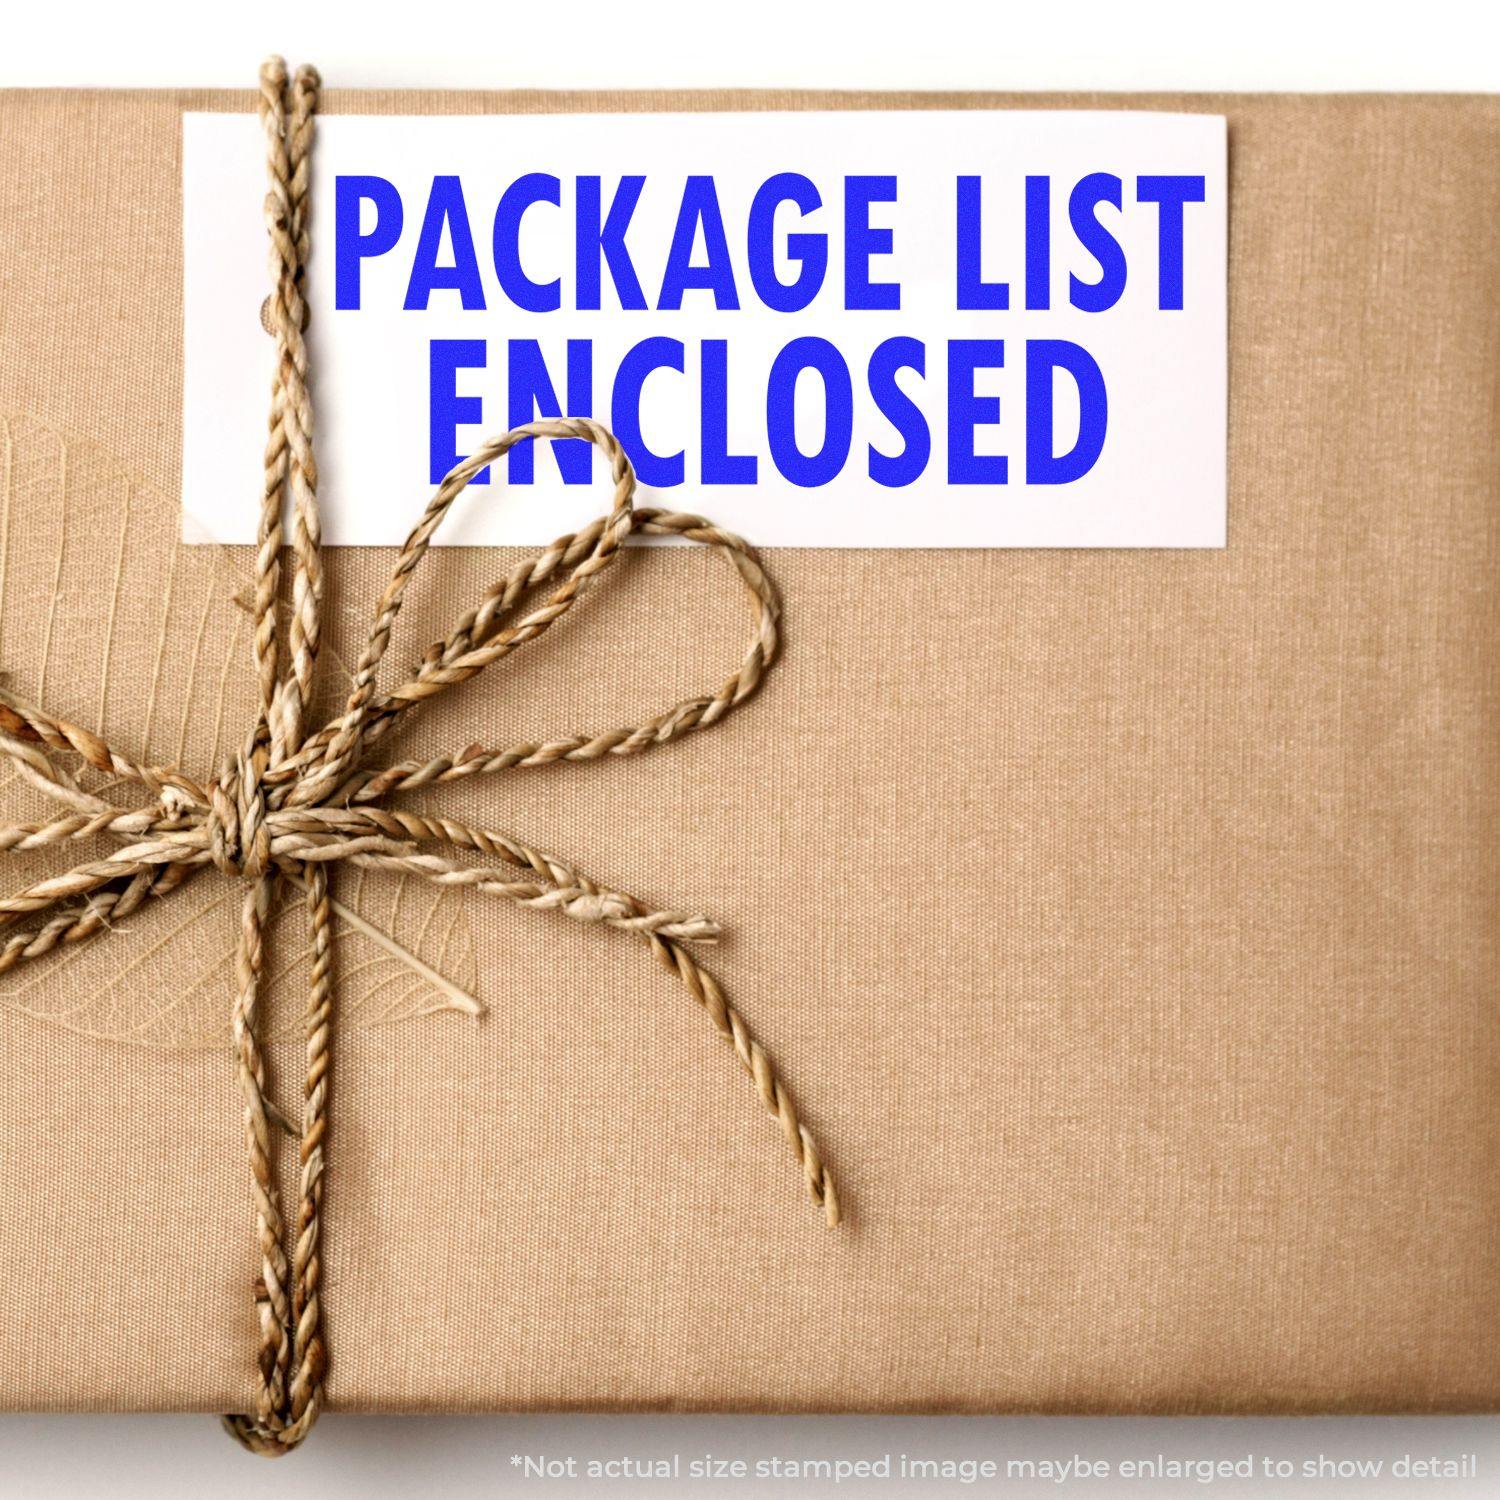 A stock office rubber stamp with a stamped image showing how the text "PACKAGE LIST ENCLOSED" in a large font is displayed after stamping.